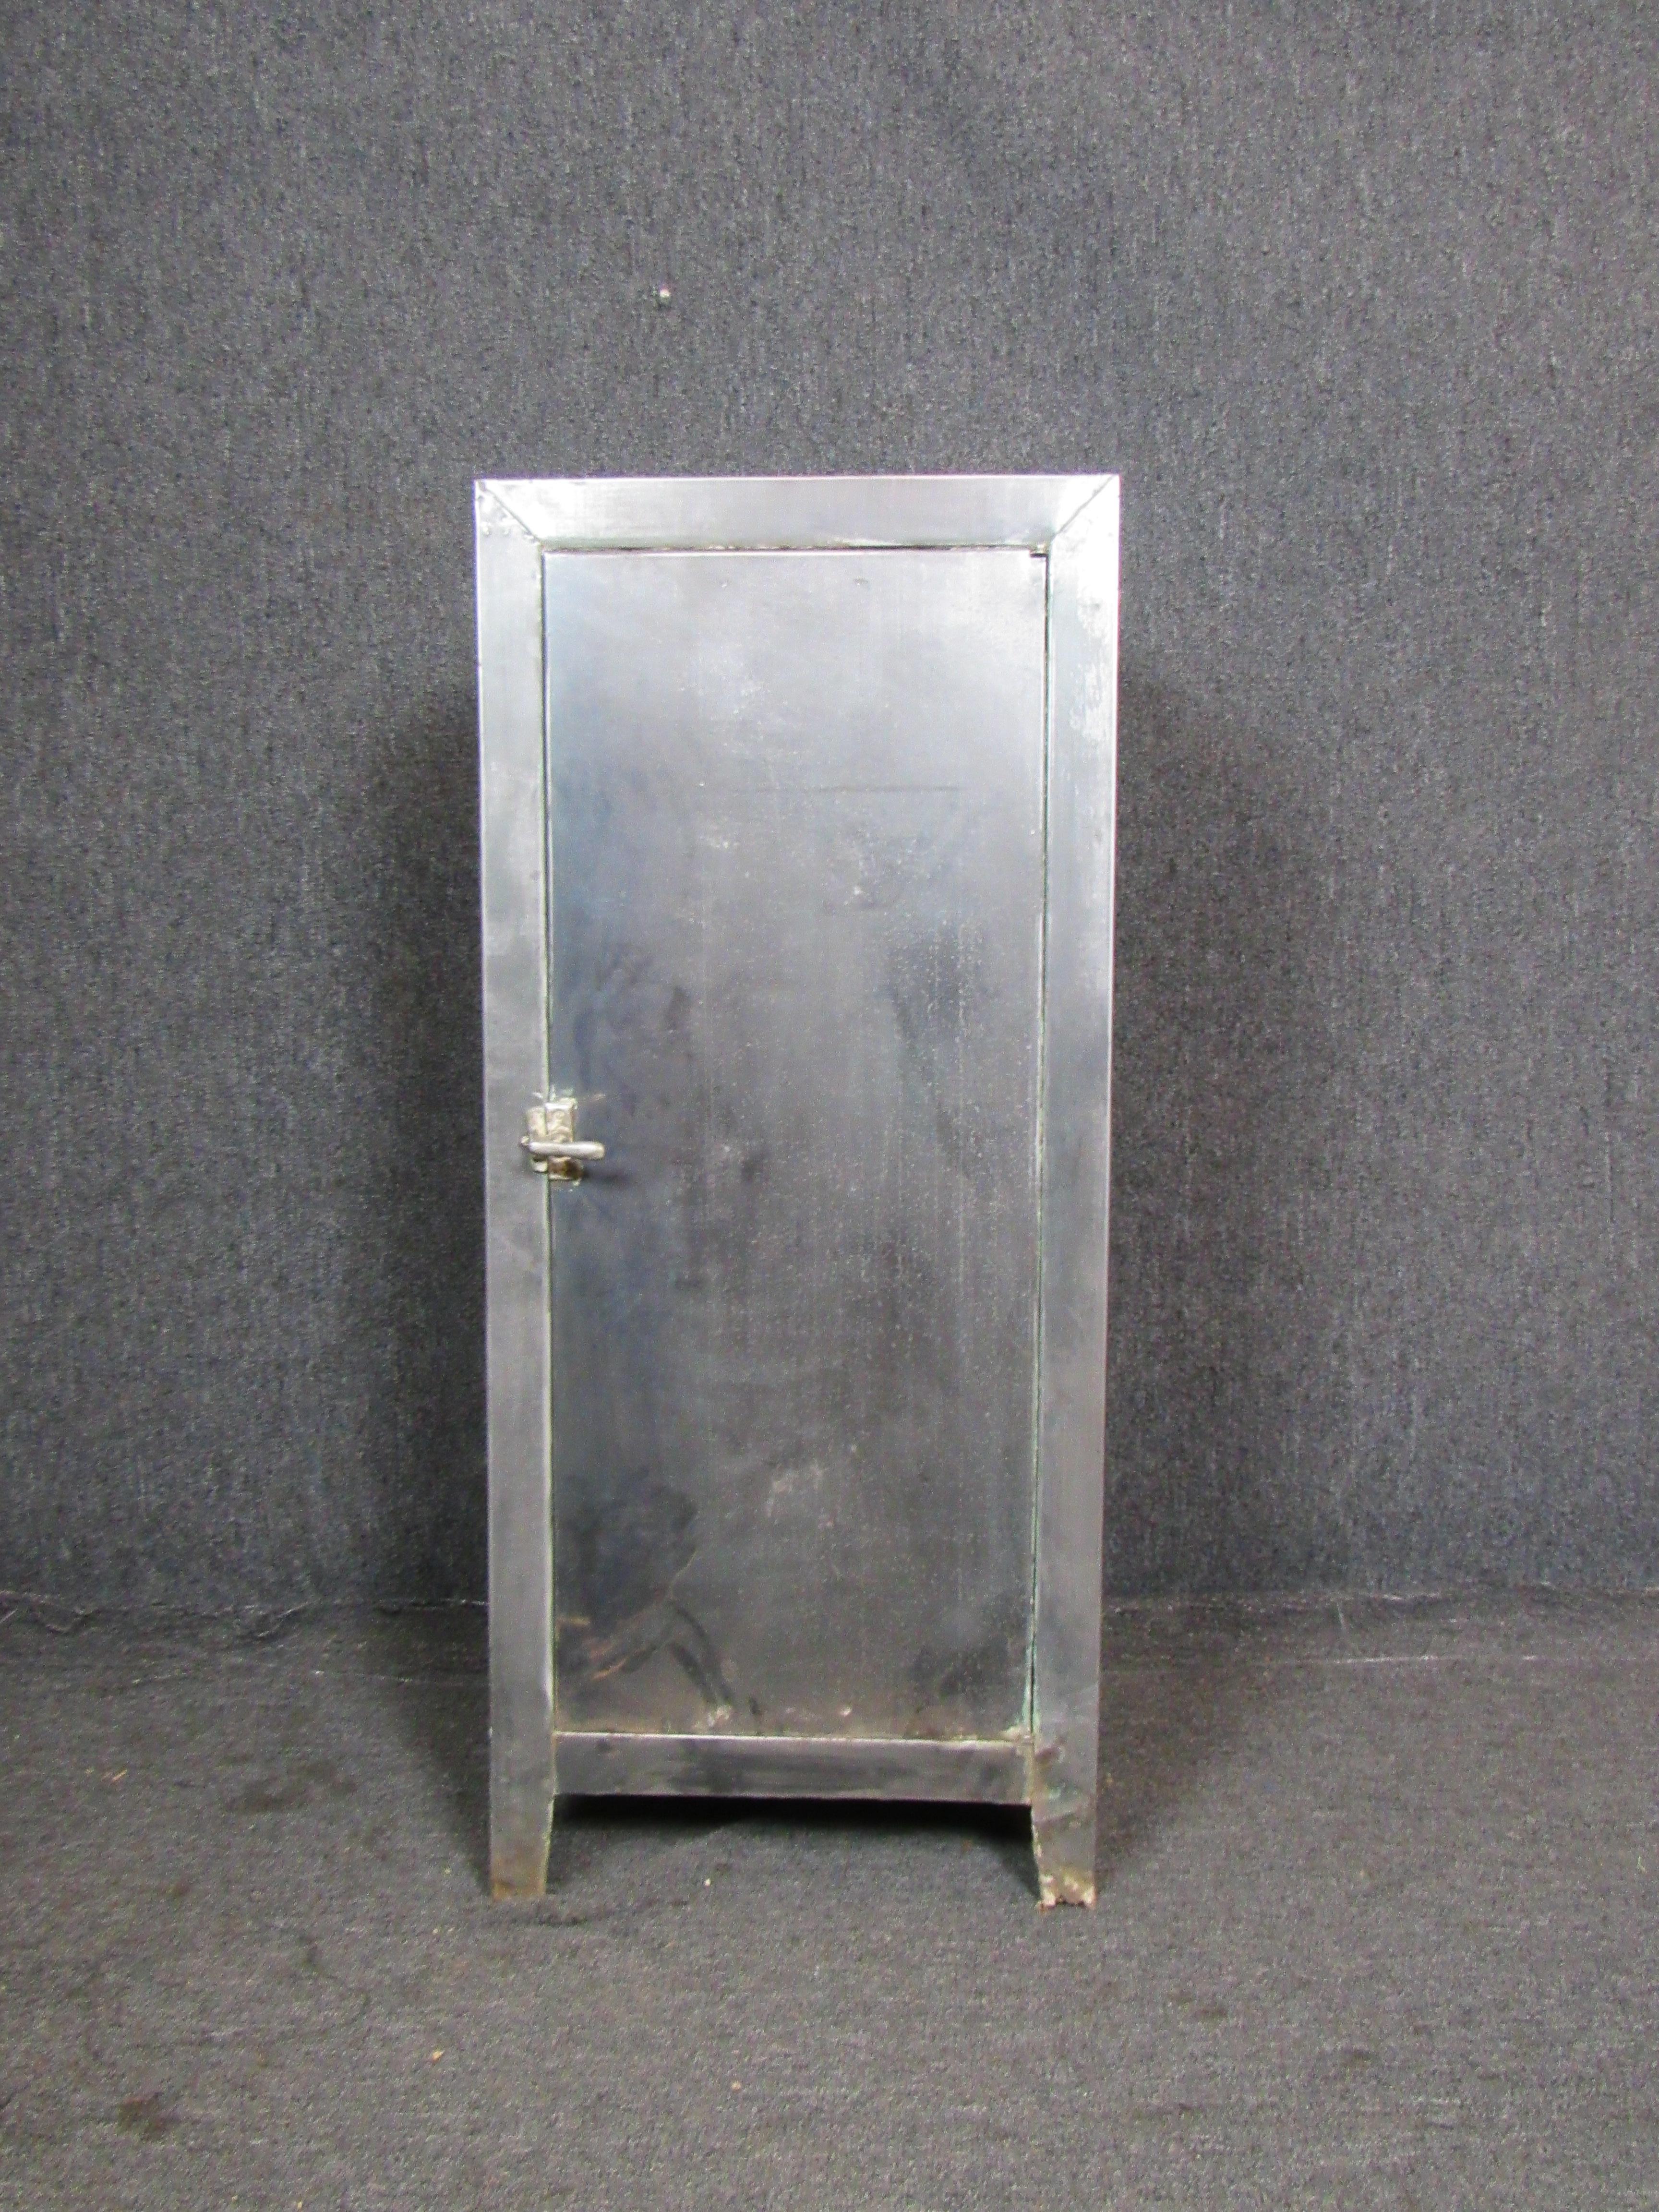 Wonderful vintage medical cabinet, featuring a gorgeous natural patina that makes industrial metal so sought after. A compact footprint makes this cabinet a perfect storage solution for any small space- in the home, or at work. Adjustable shelves